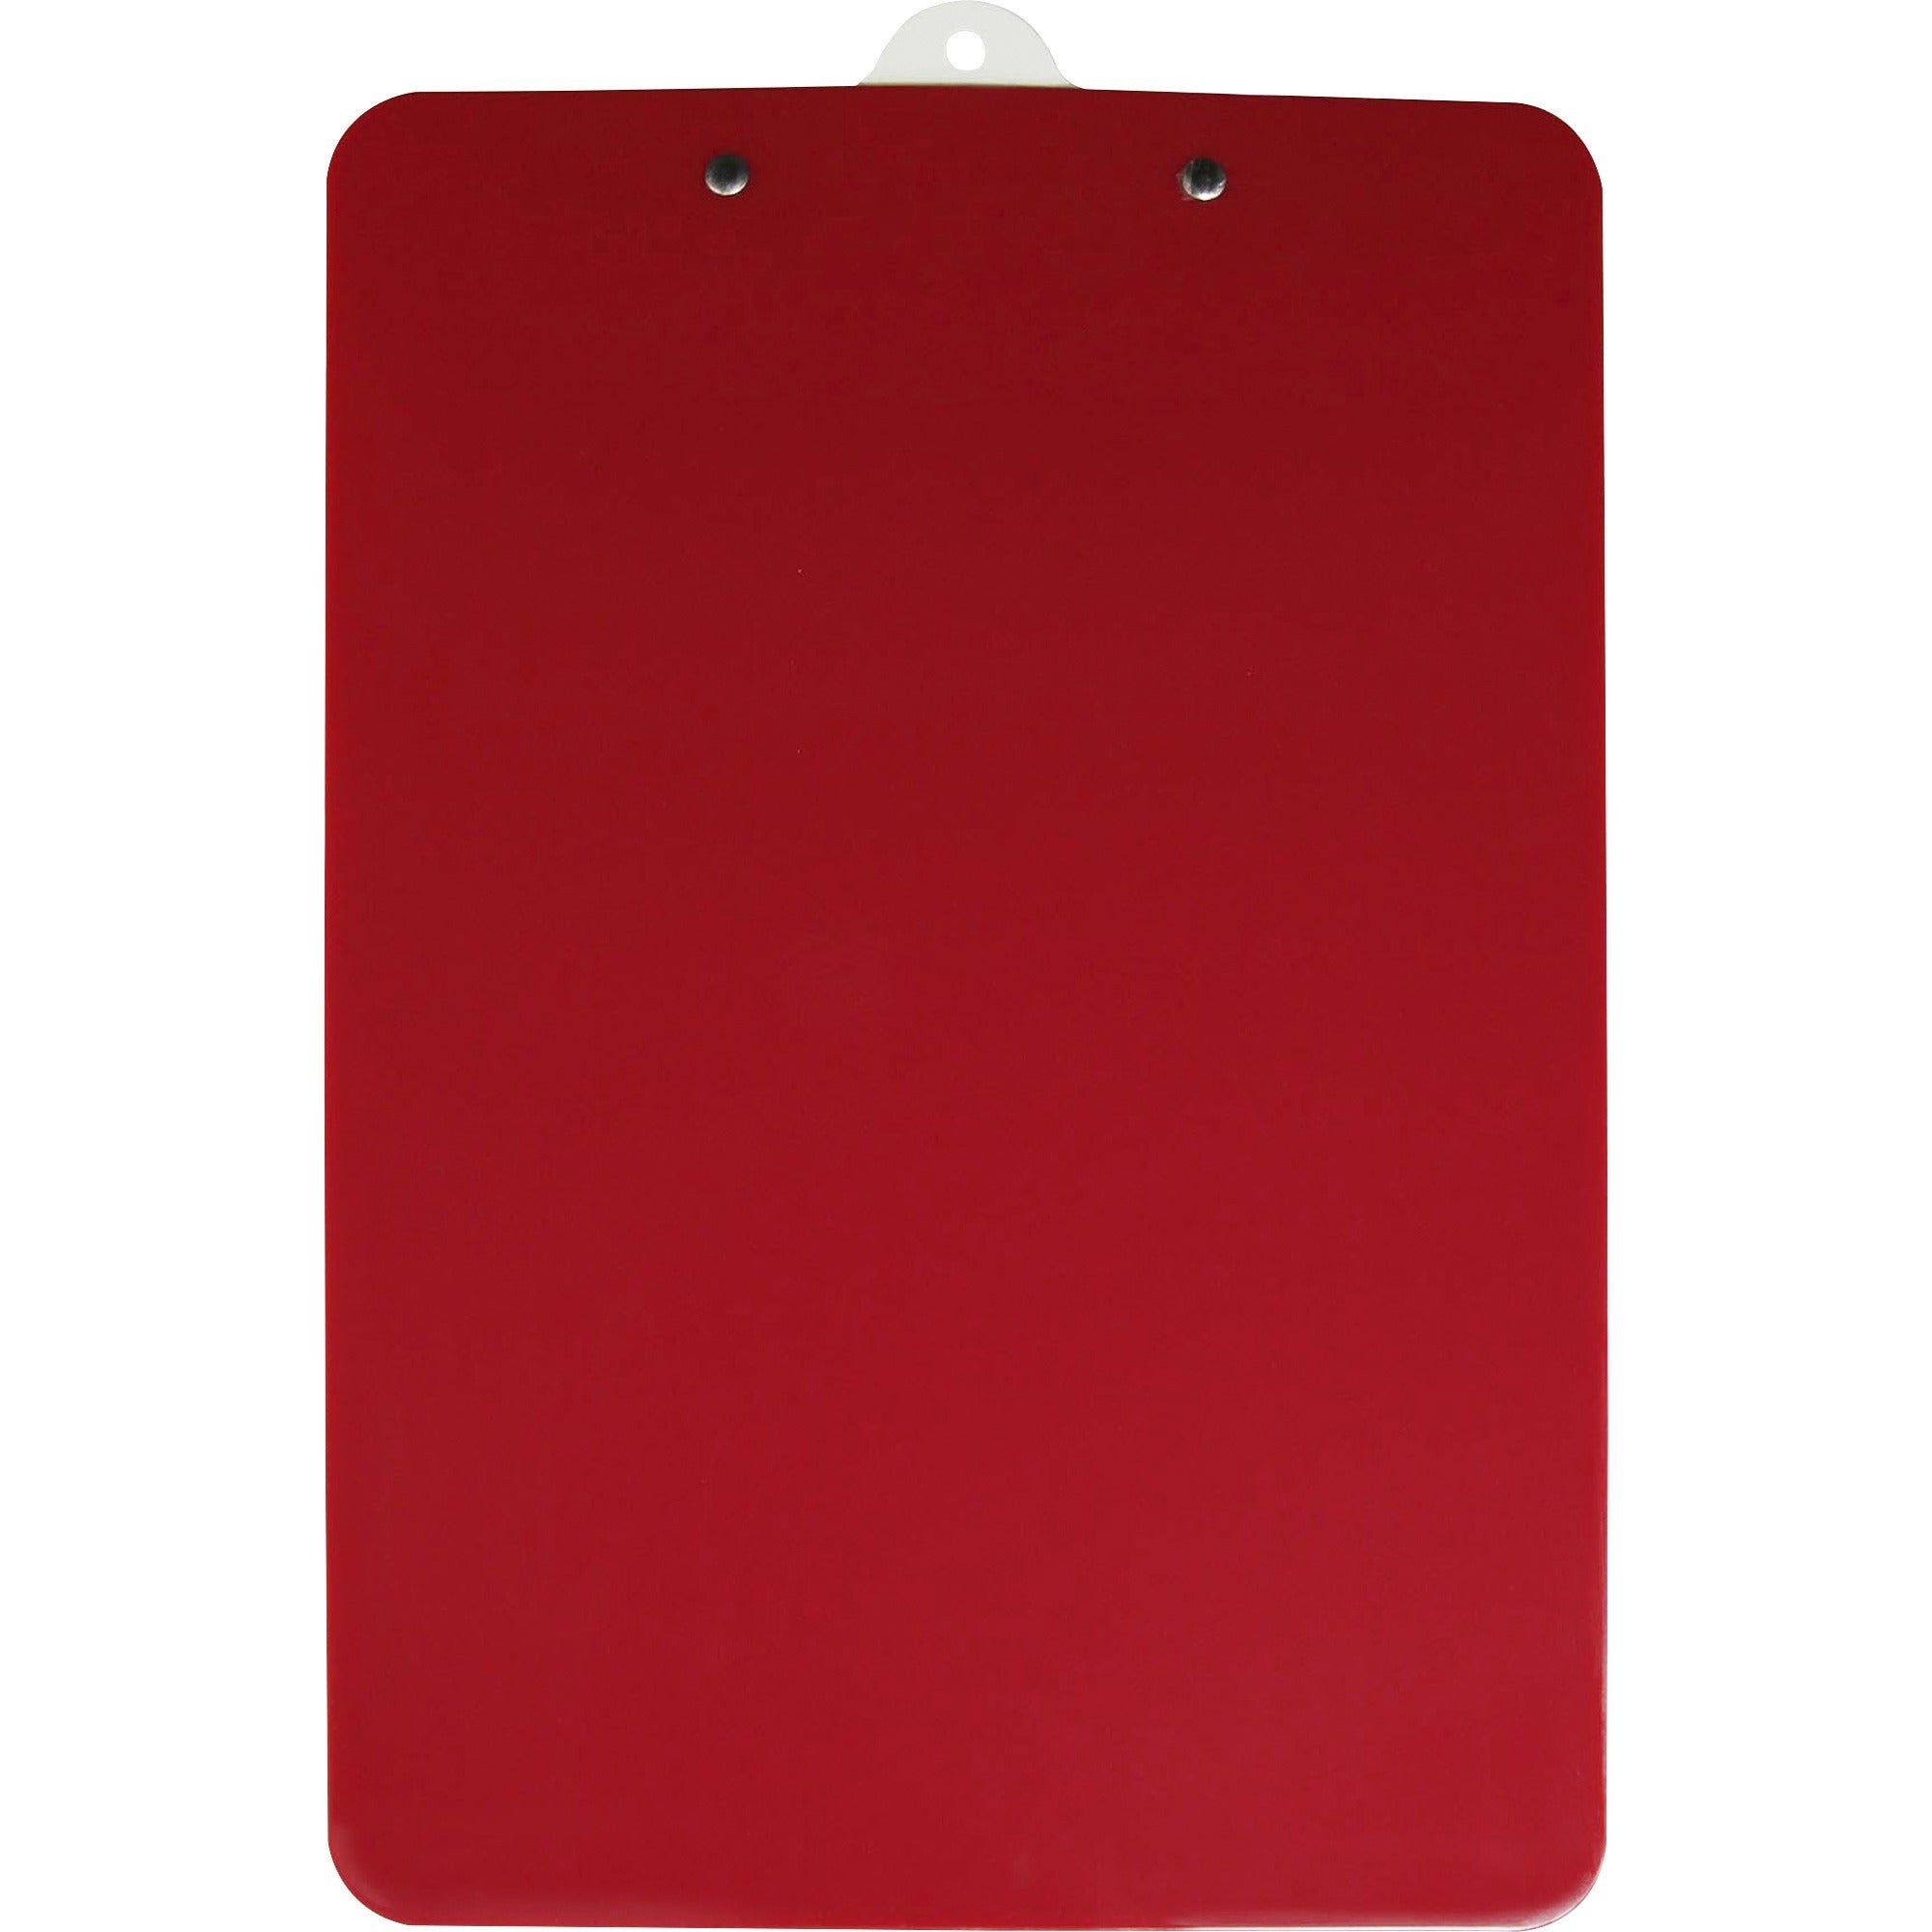 saunders-antimicrobial-clipboard-8-1-2-x-11-red-white-1-each_sau21611 - 4